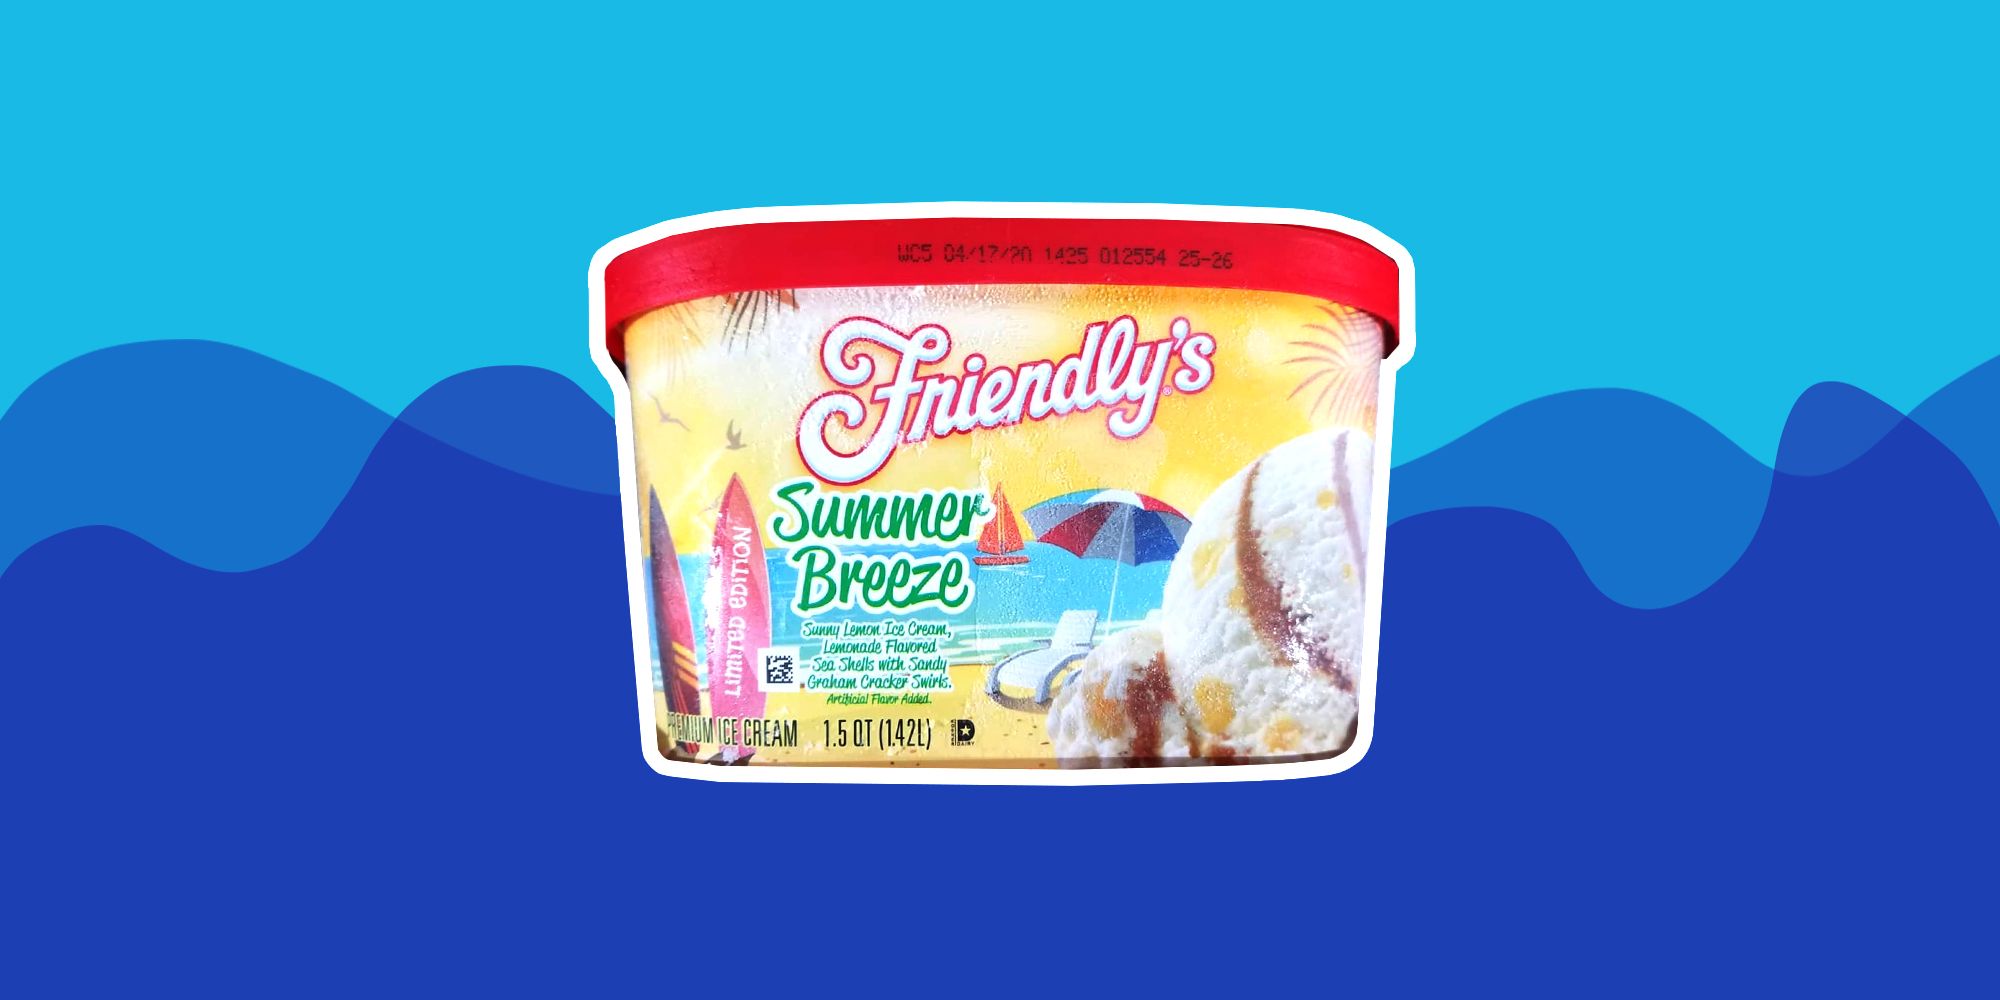 Friendly's Summer Breeze Ice Cream Brings Beachy Flavors to Life